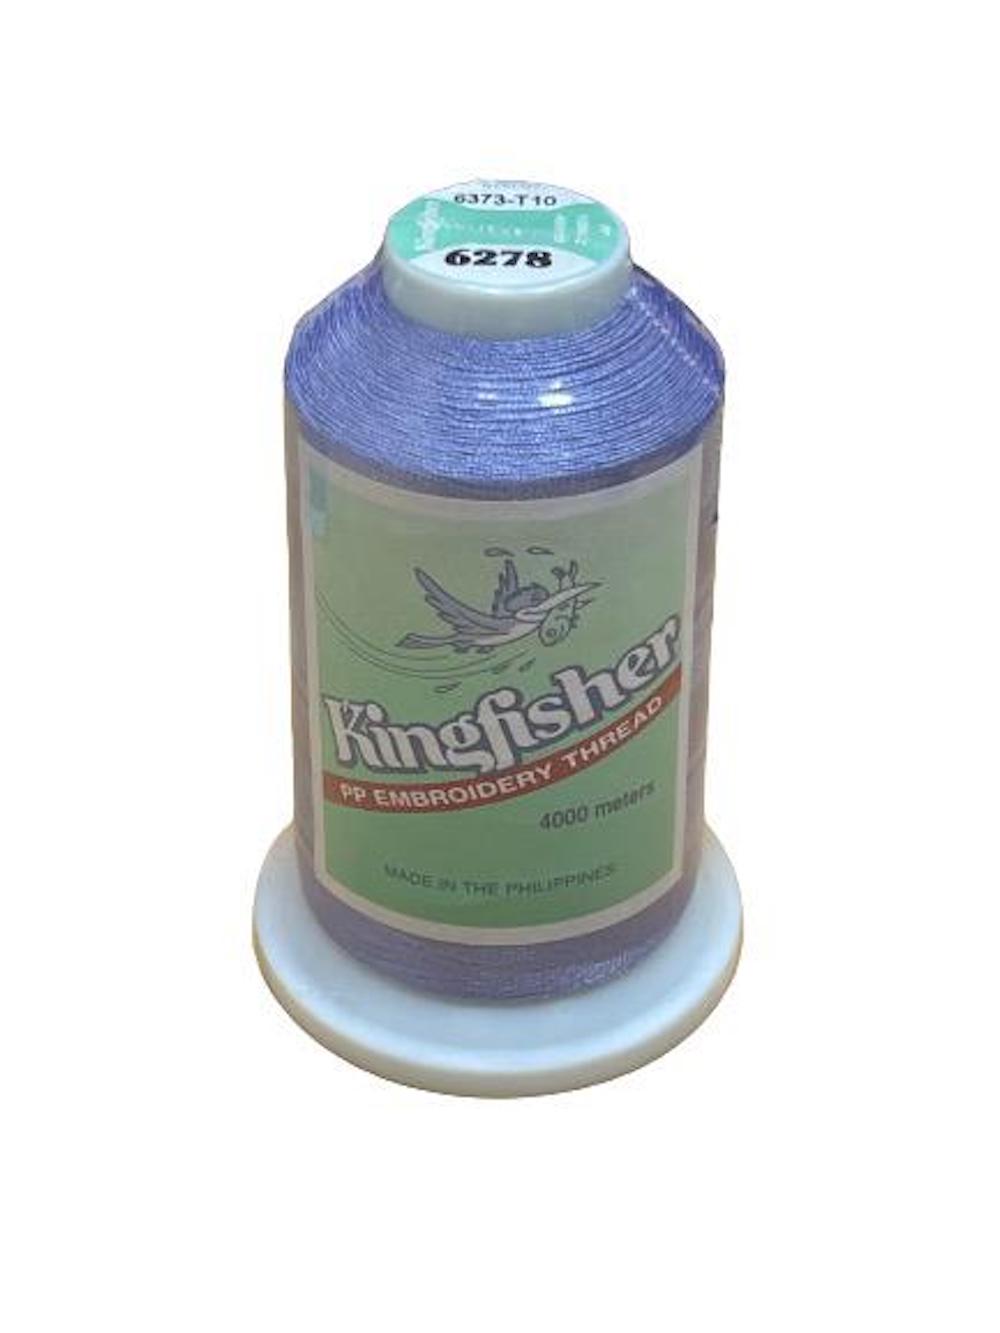 King Fisher Embroidery Thread 4000m 6278 - MY SEWING MALL